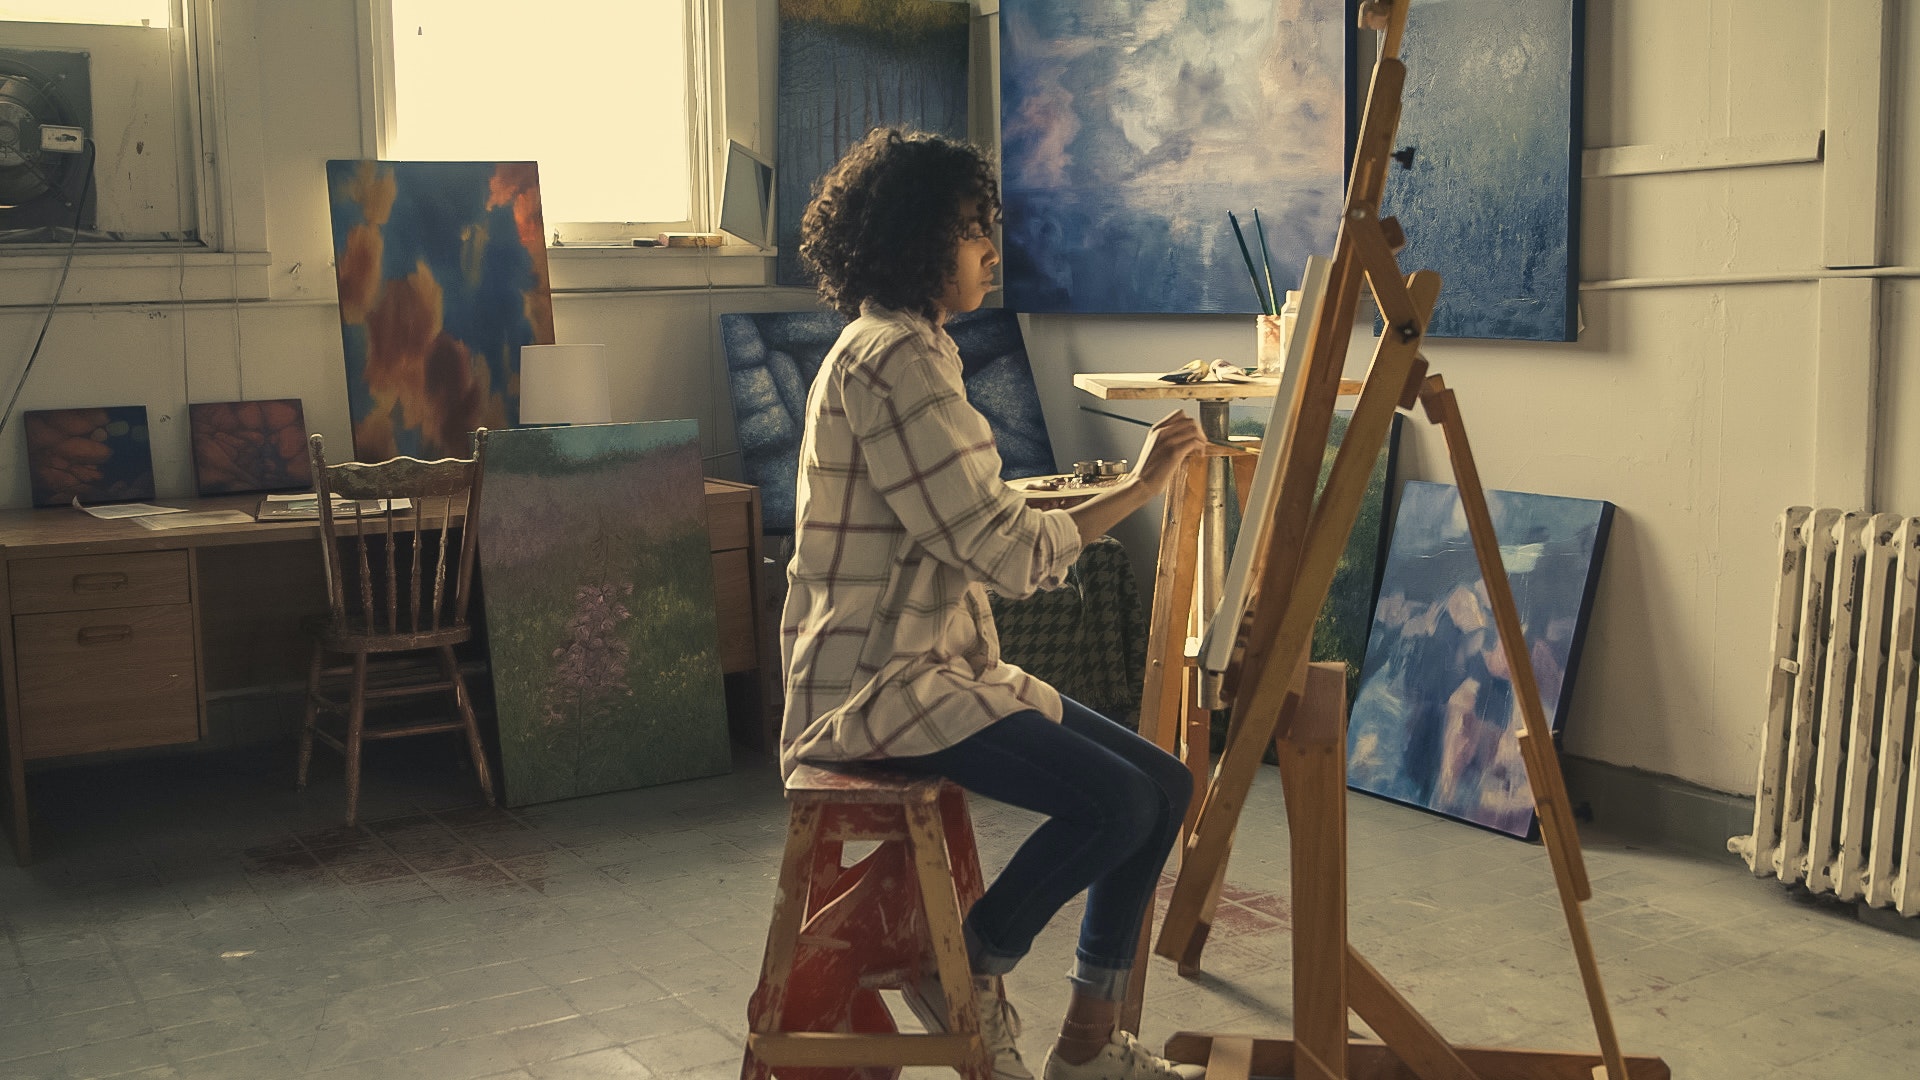 An artist painting on a canvas in her studio